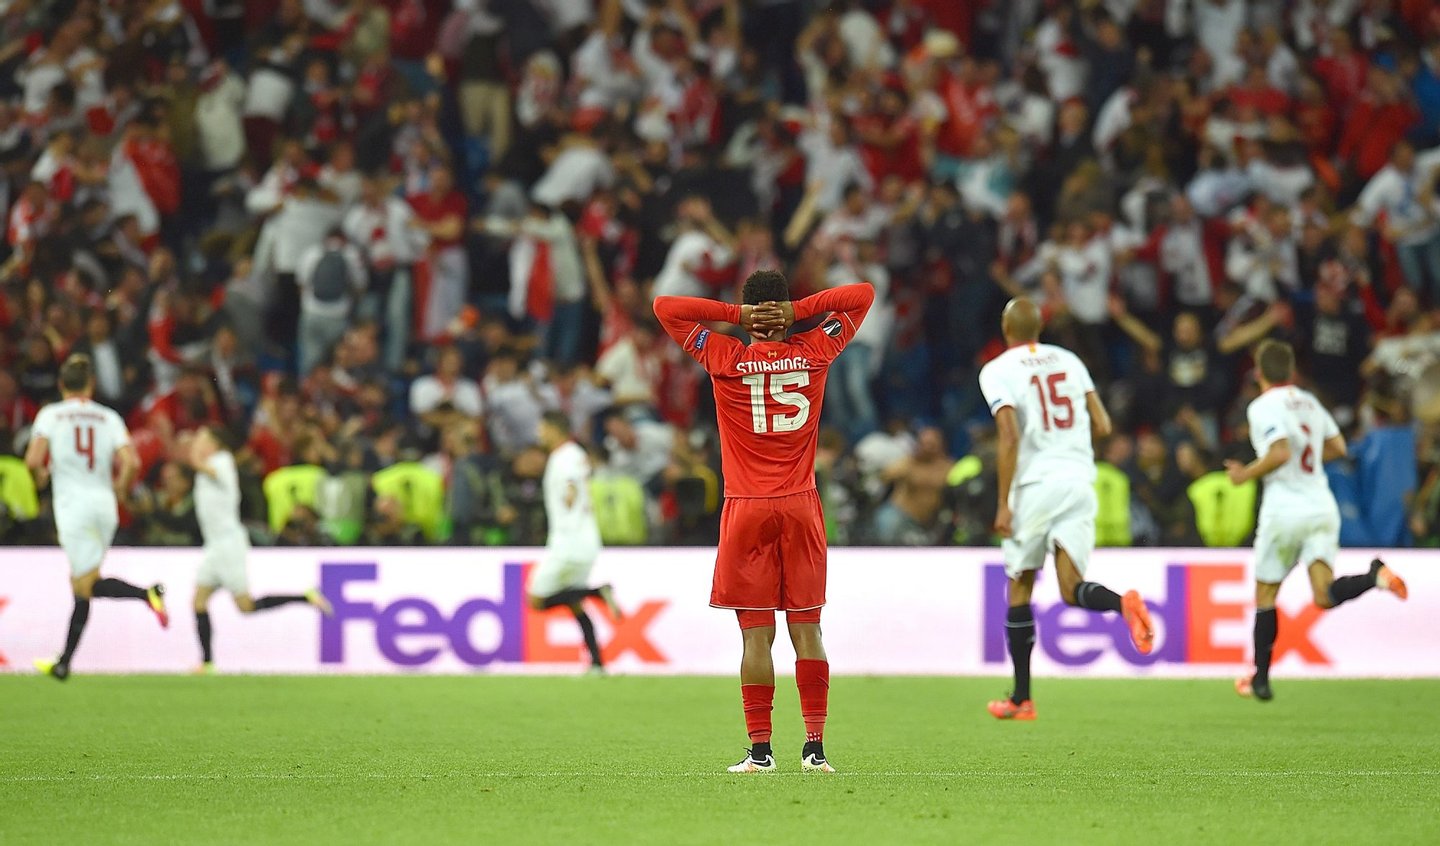 BASEL, SWITZERLAND - MAY 18: (THE SUN OUT, THE SUN ON SUNDAY OUT) Daniel Sturridge of Liverpool dejected during the UEFA Europa League Final match between Liverpool and Sevilla at St. Jakob-Park on May 18, 2016 in Basel, Switzerland. (Photo by Andrew Powell/Liverpool FC via Getty Images)